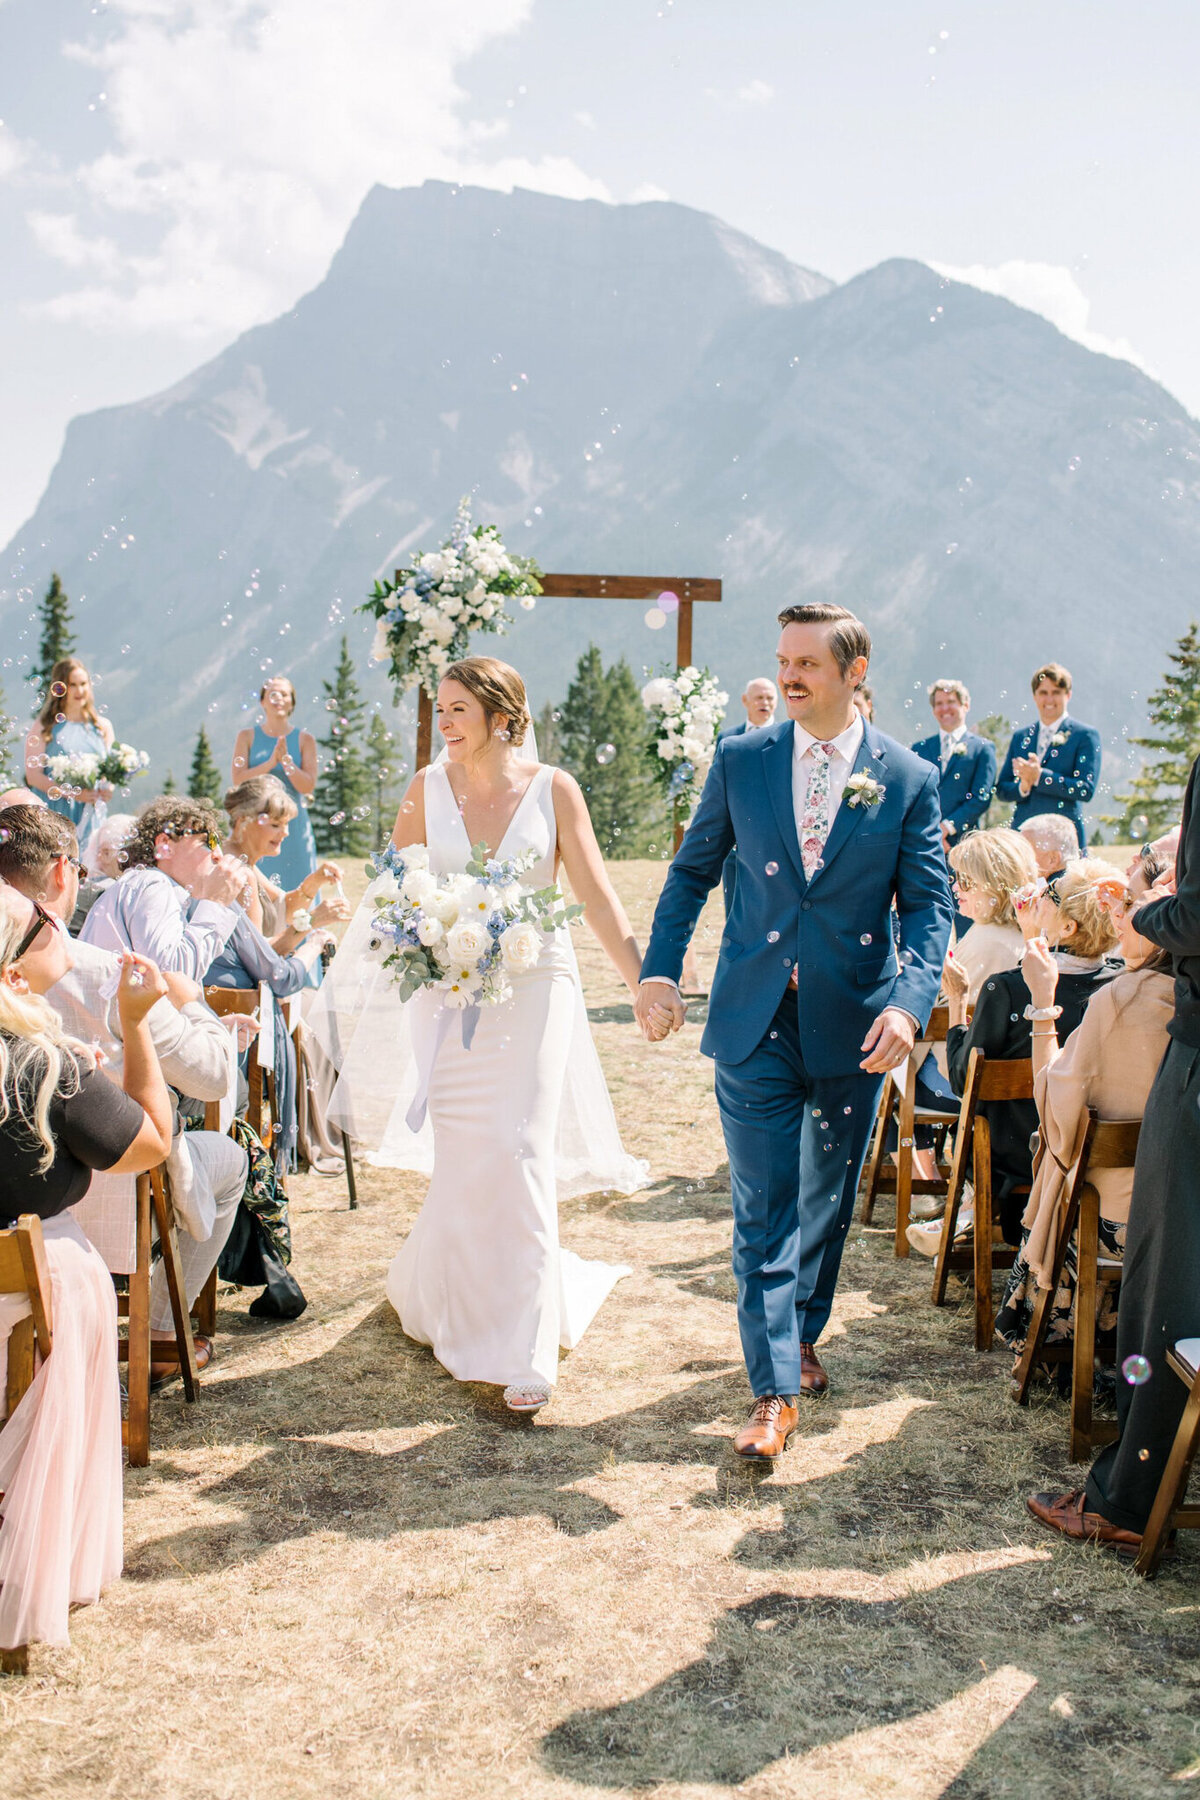 Wedding ceremony captured by Corrina Walker Photography, timeless and elegant wedding photographer in Calgary, Alberta. Featured on the Bronte Bride Vendor Guide.